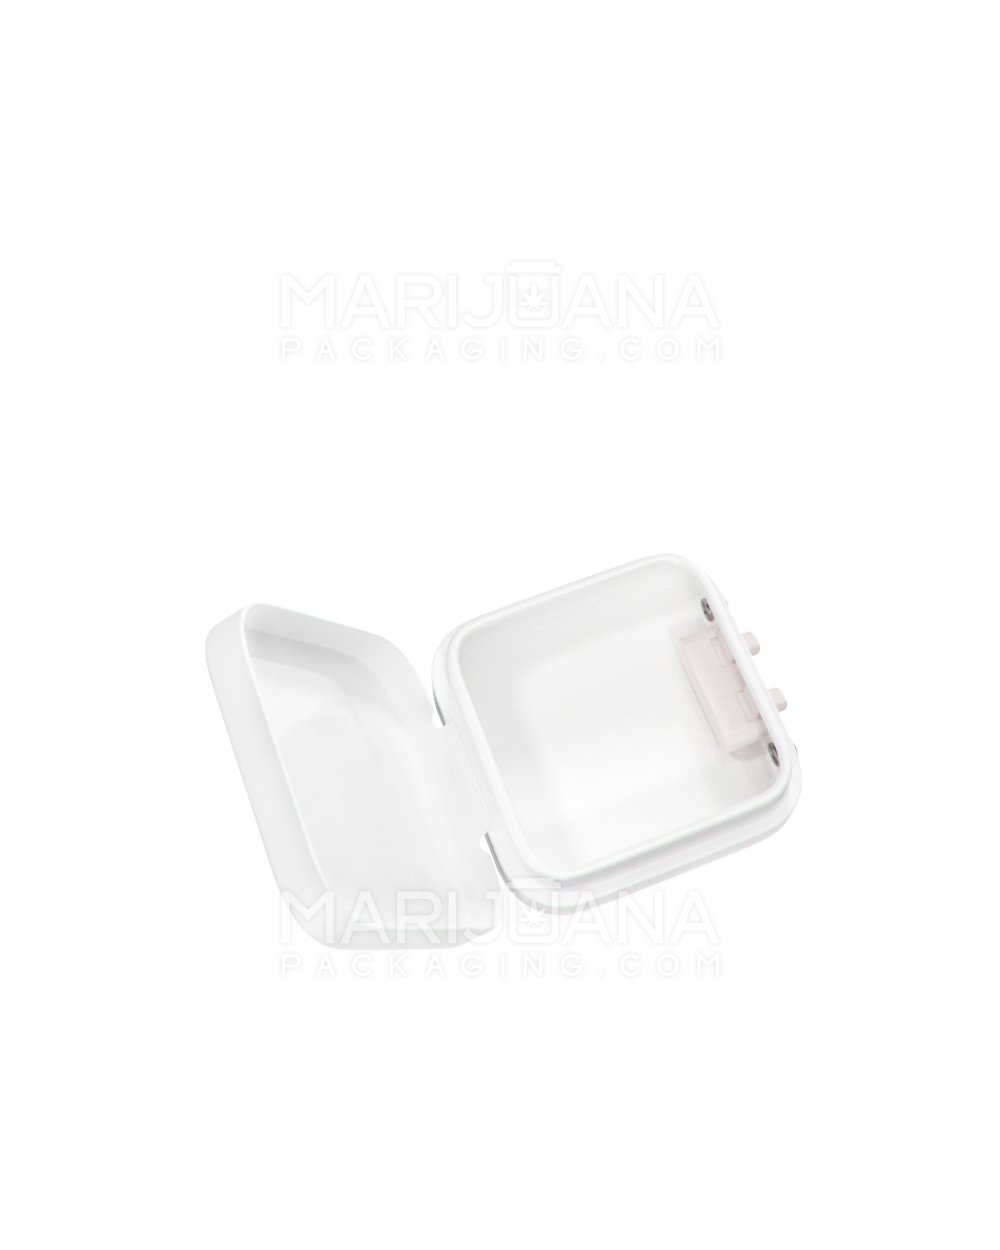 Custom 100% Recyclable Child Resistant Hinged-Lid Micro Pack Edible Container | 53.4mm x 50.1mm - White Tin - 6